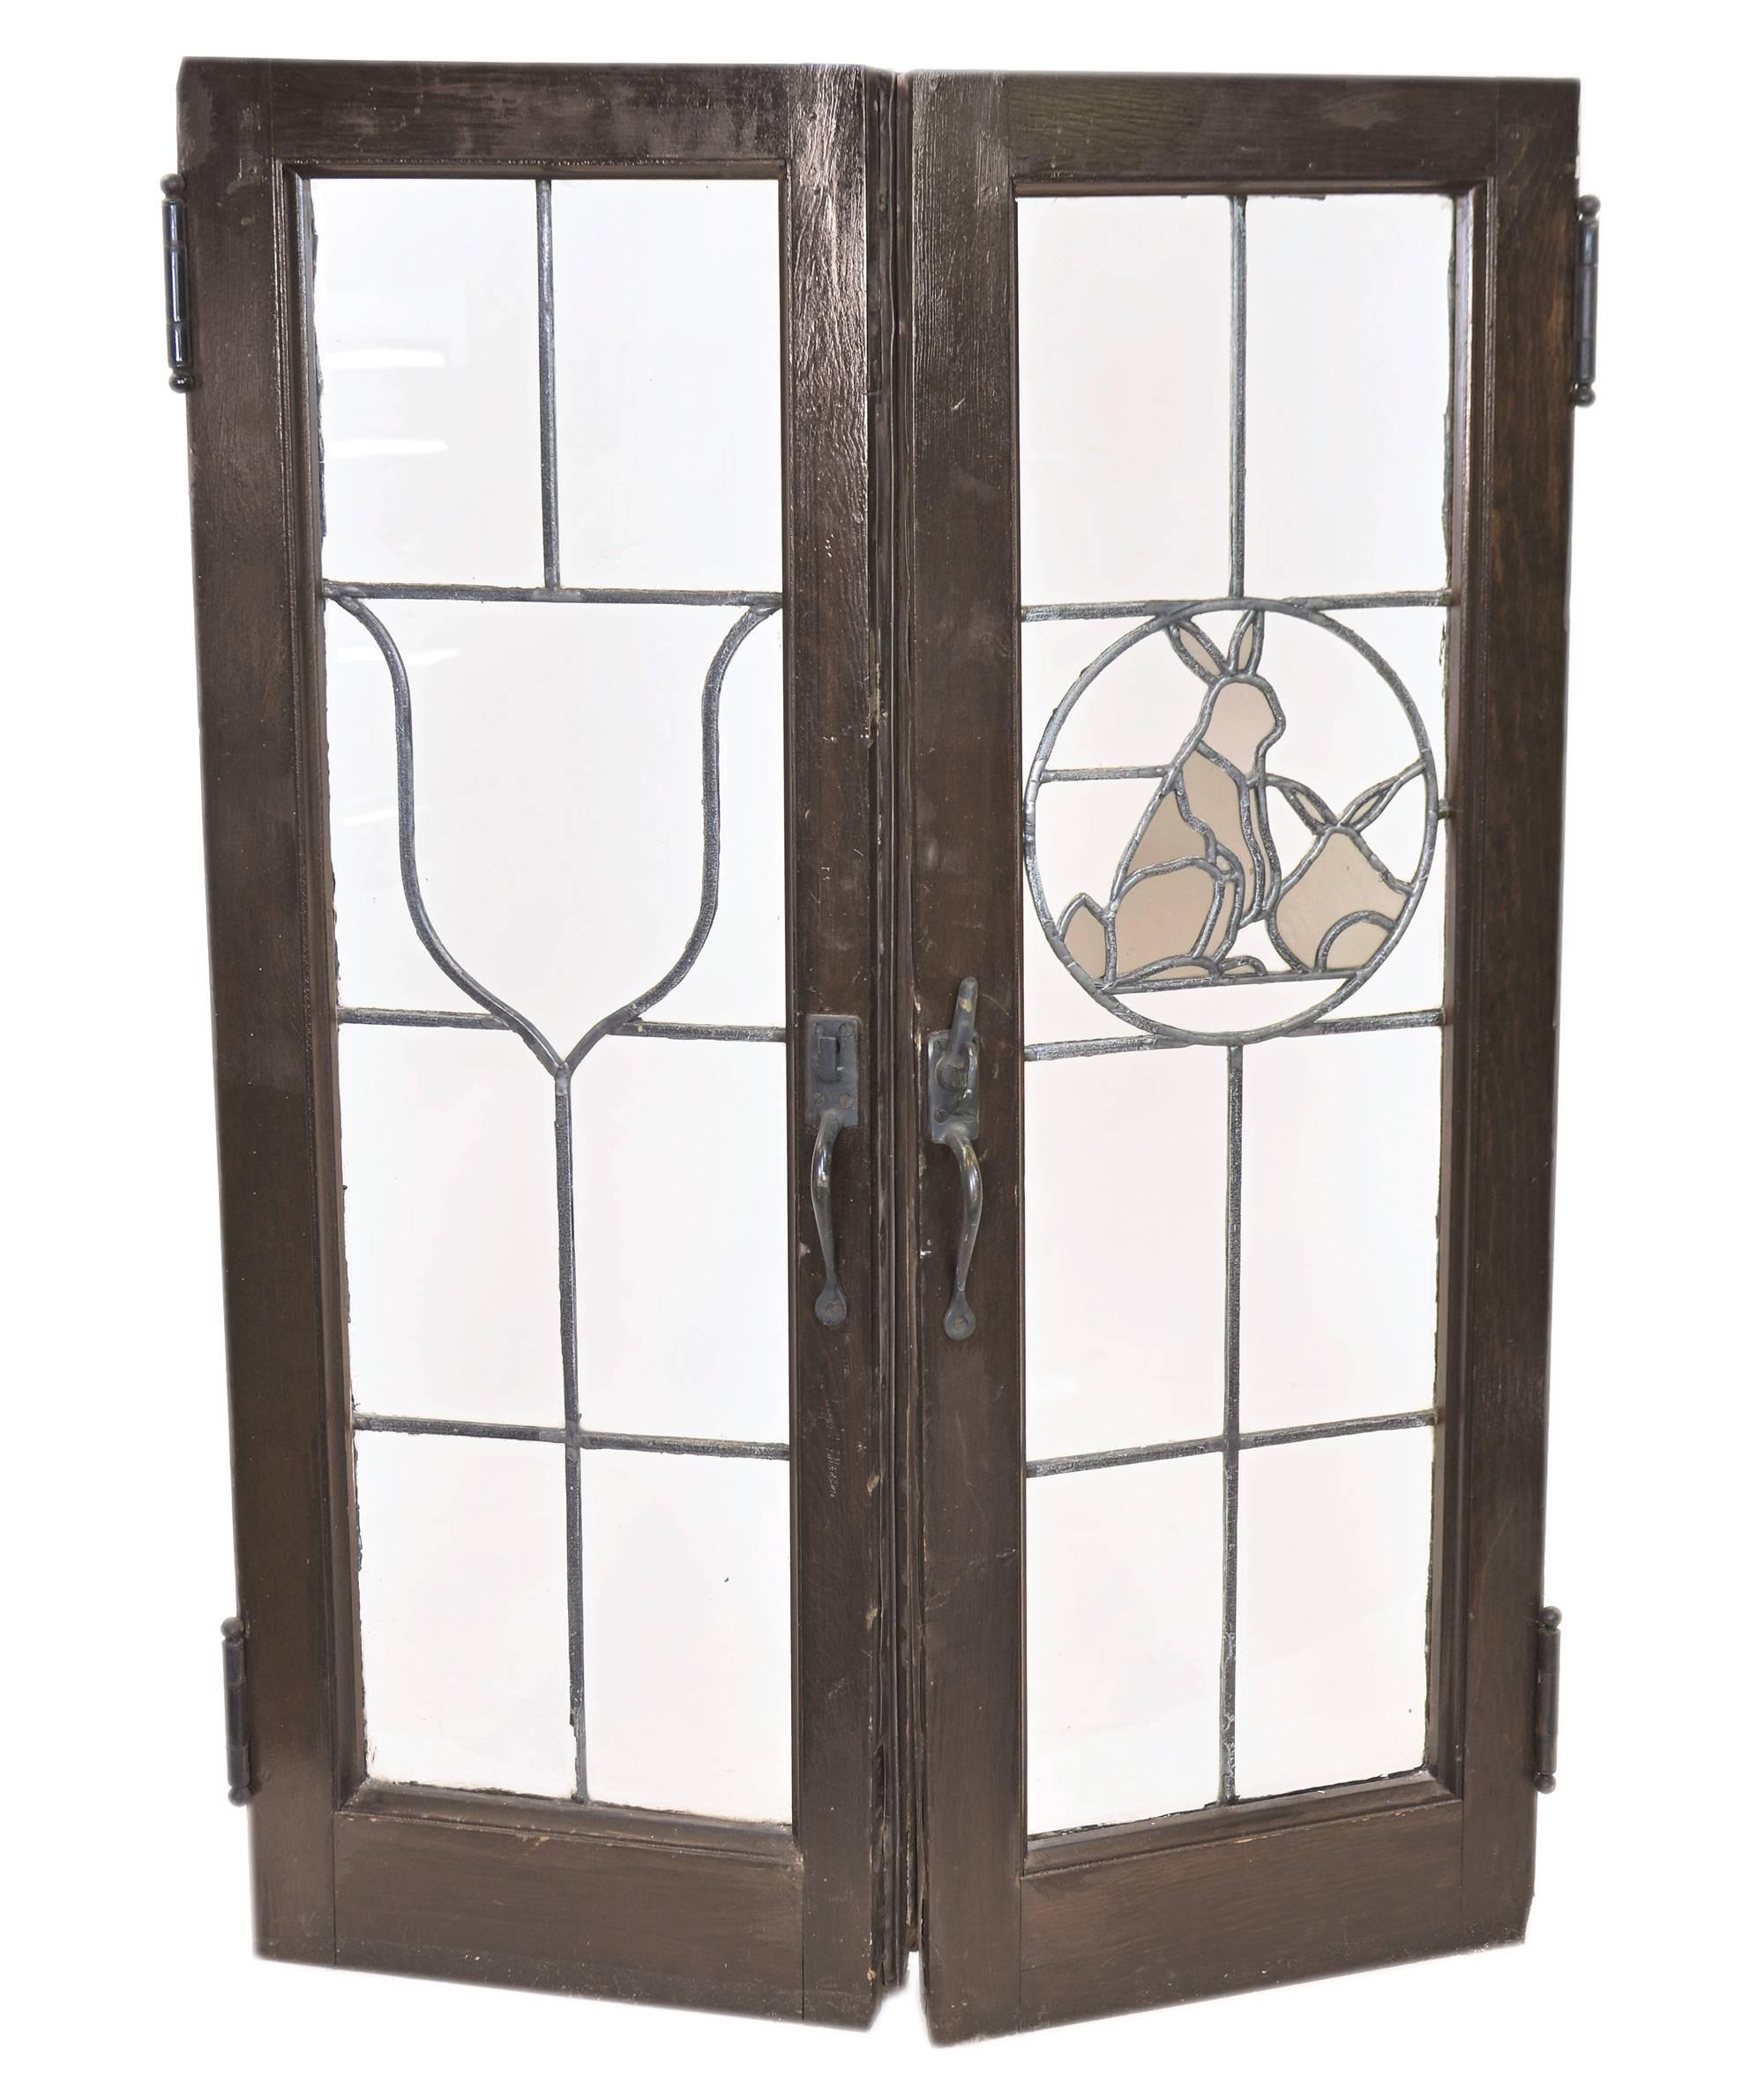 Recovered from a sizable home in a historic Minneapolis neighborhood, this set of eight French windows feature a wonderful series decorative emblems, including shield, rabbits, fish and geese. Paired together three sets includes one shield and one